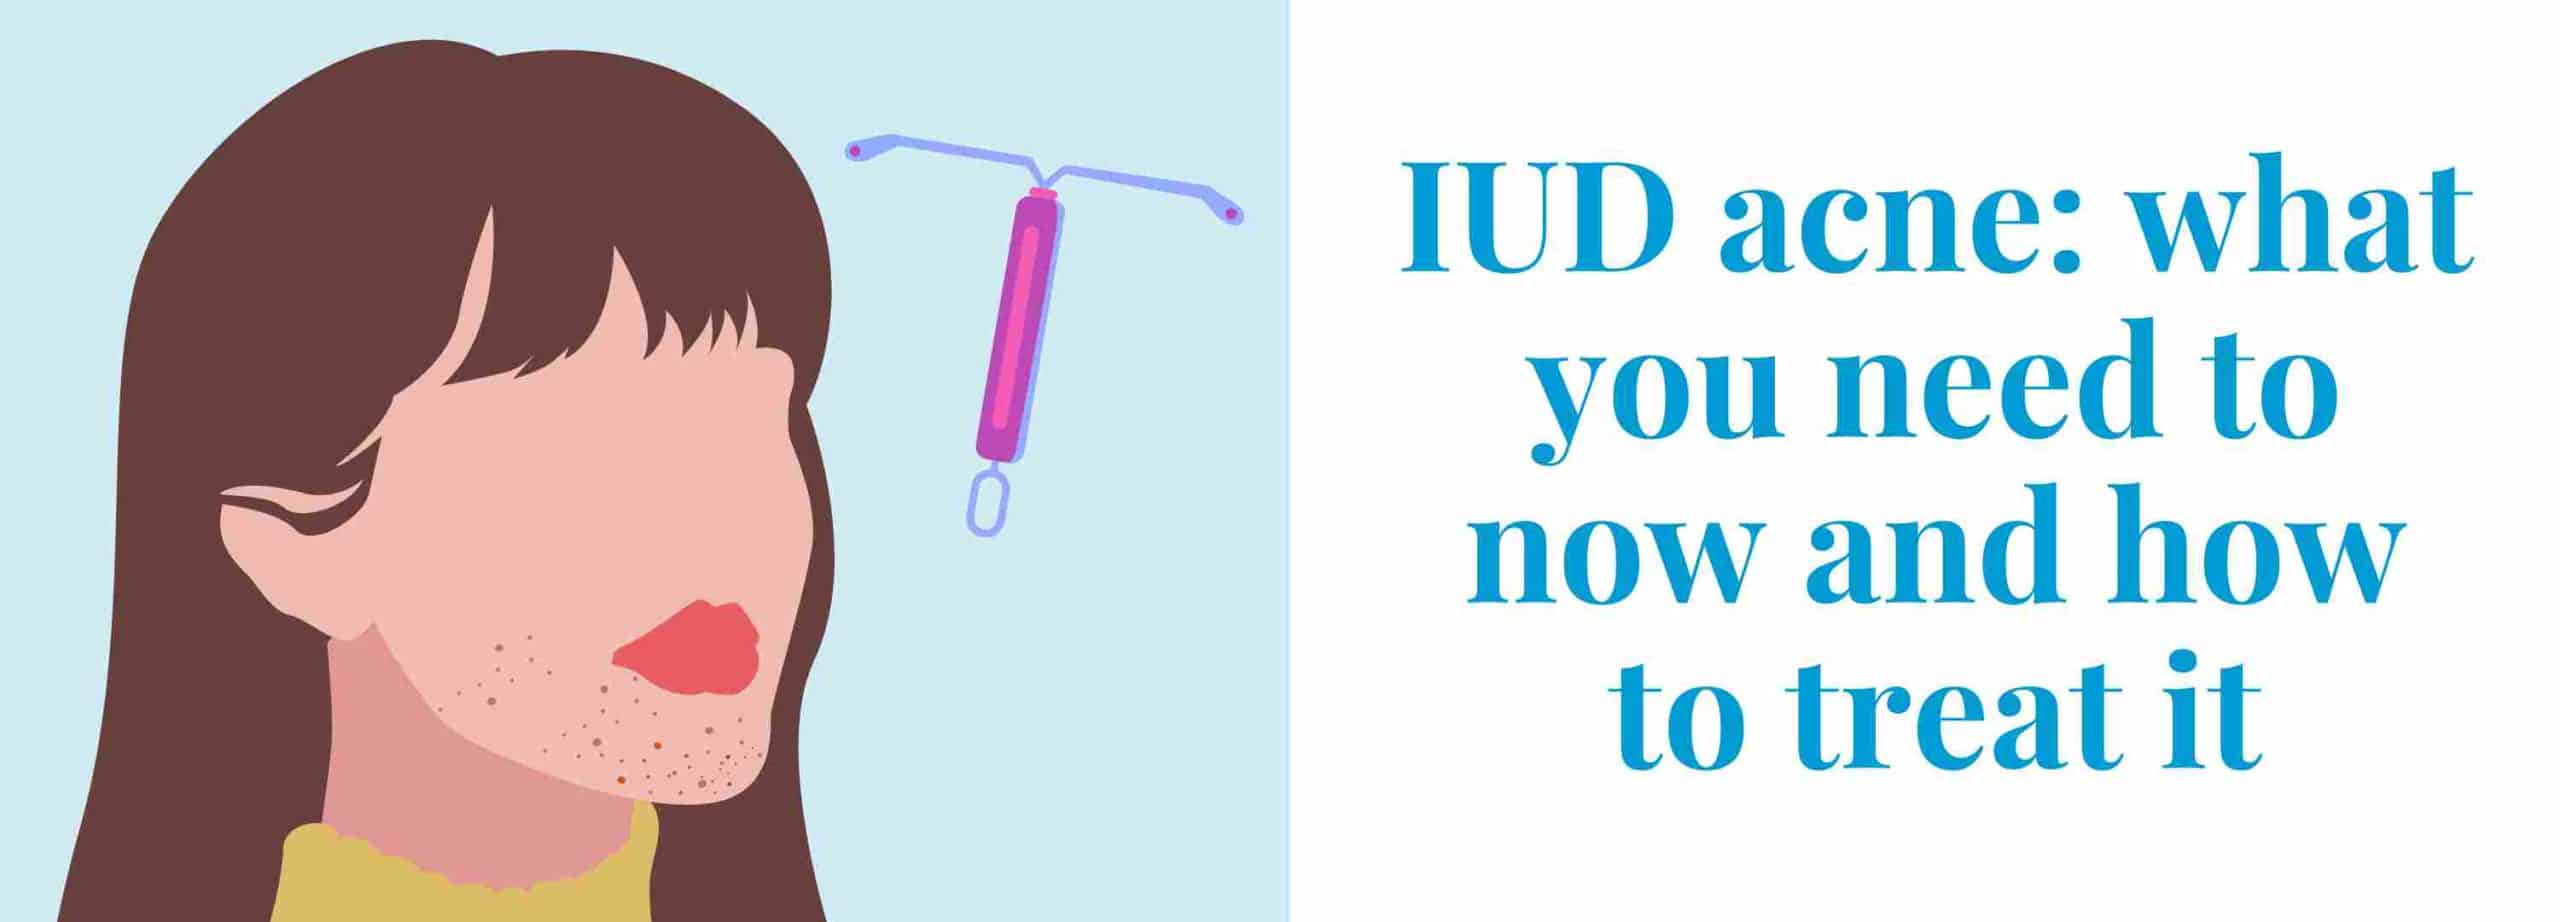 How IUD’s Can Cause Acne, and How to Treat